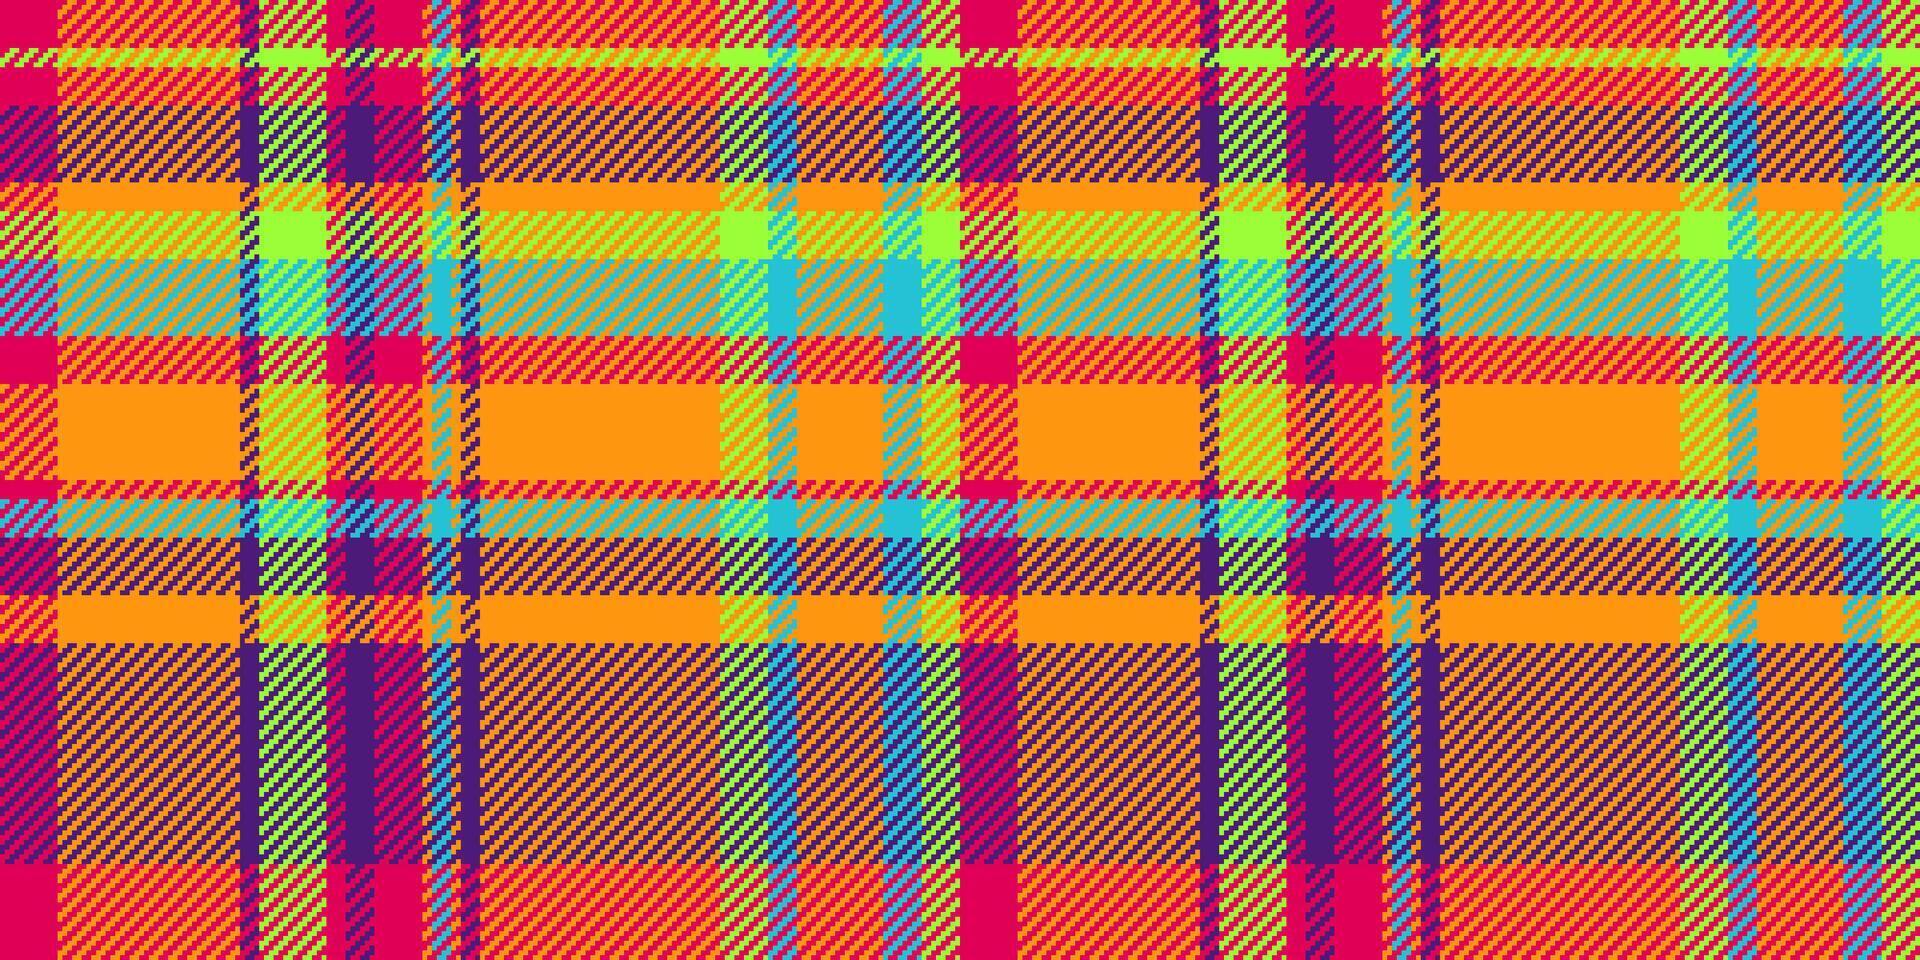 Structure vector texture seamless, native tartan check fabric. Female pattern plaid textile background in bright and violet colors.